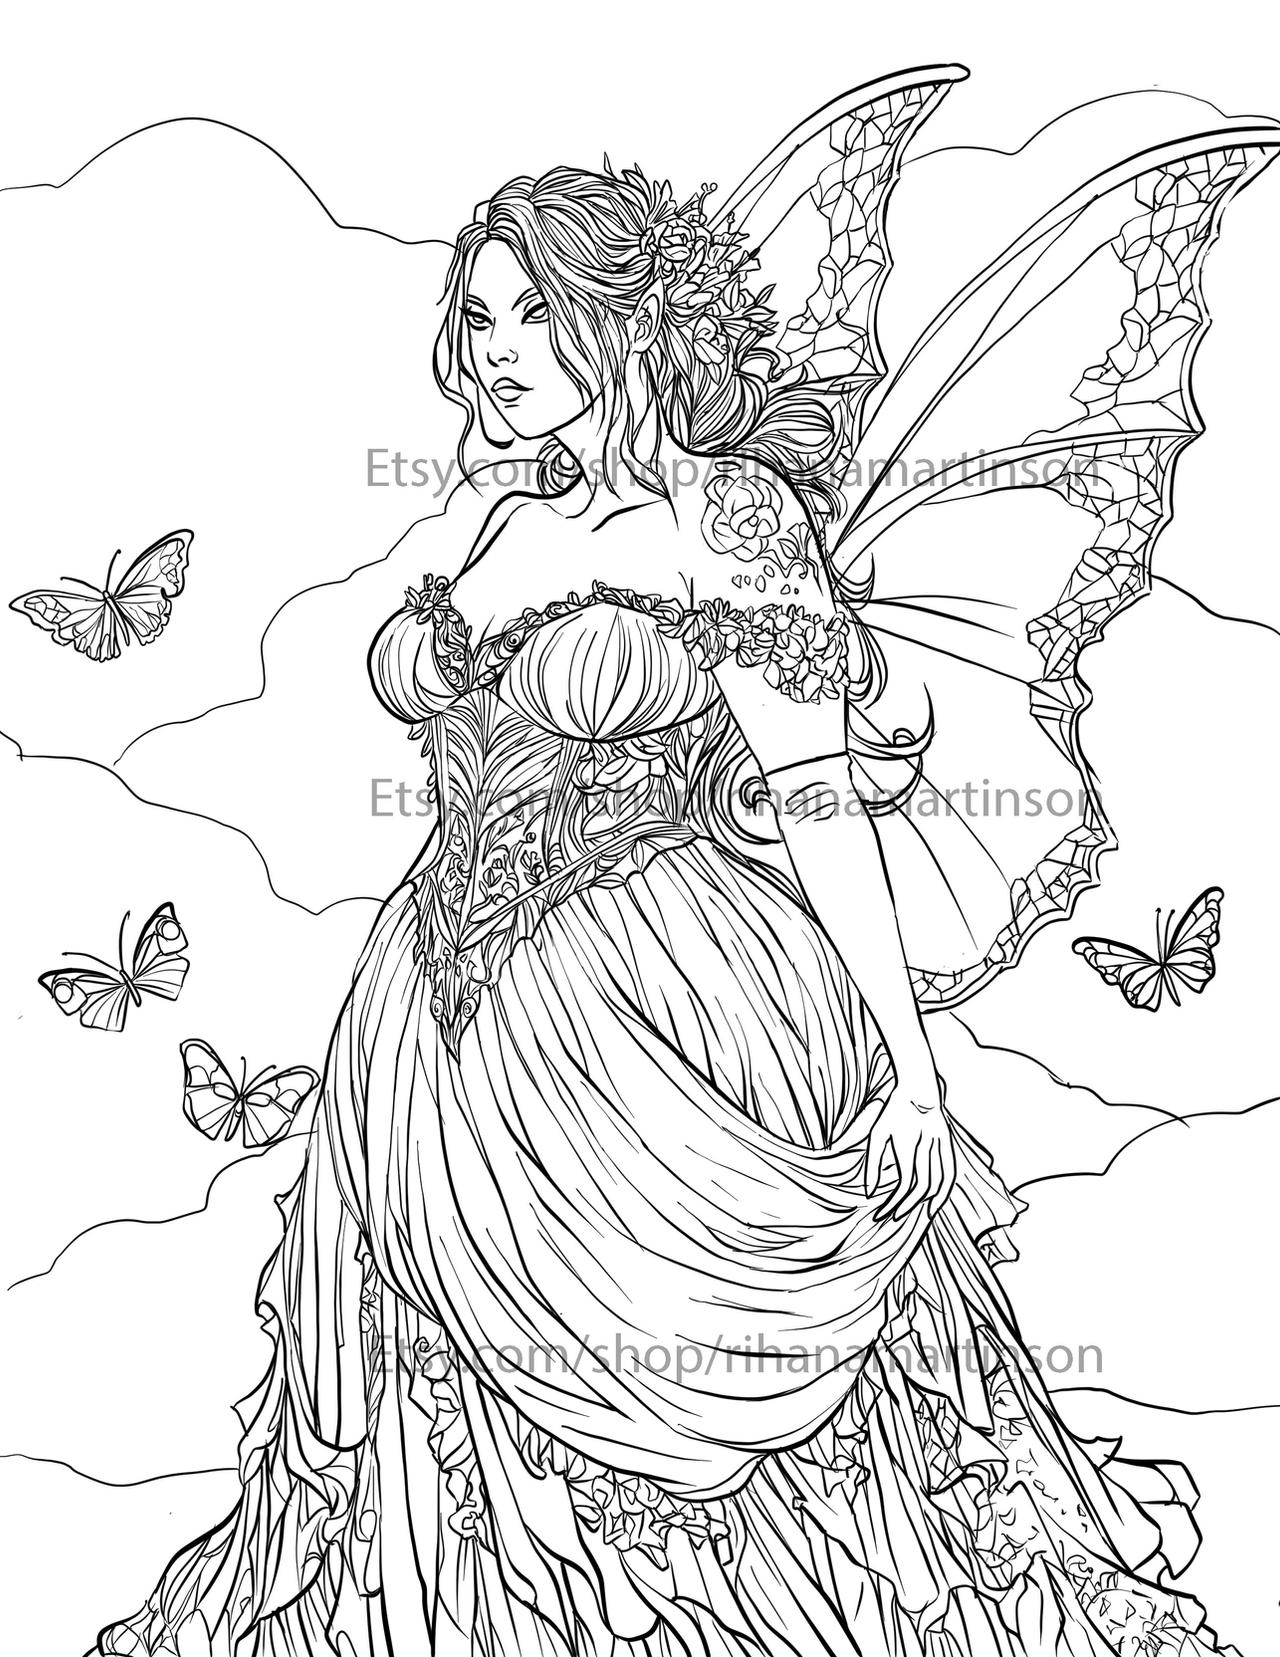 Gothic fairy coloring book page by hanasketch on